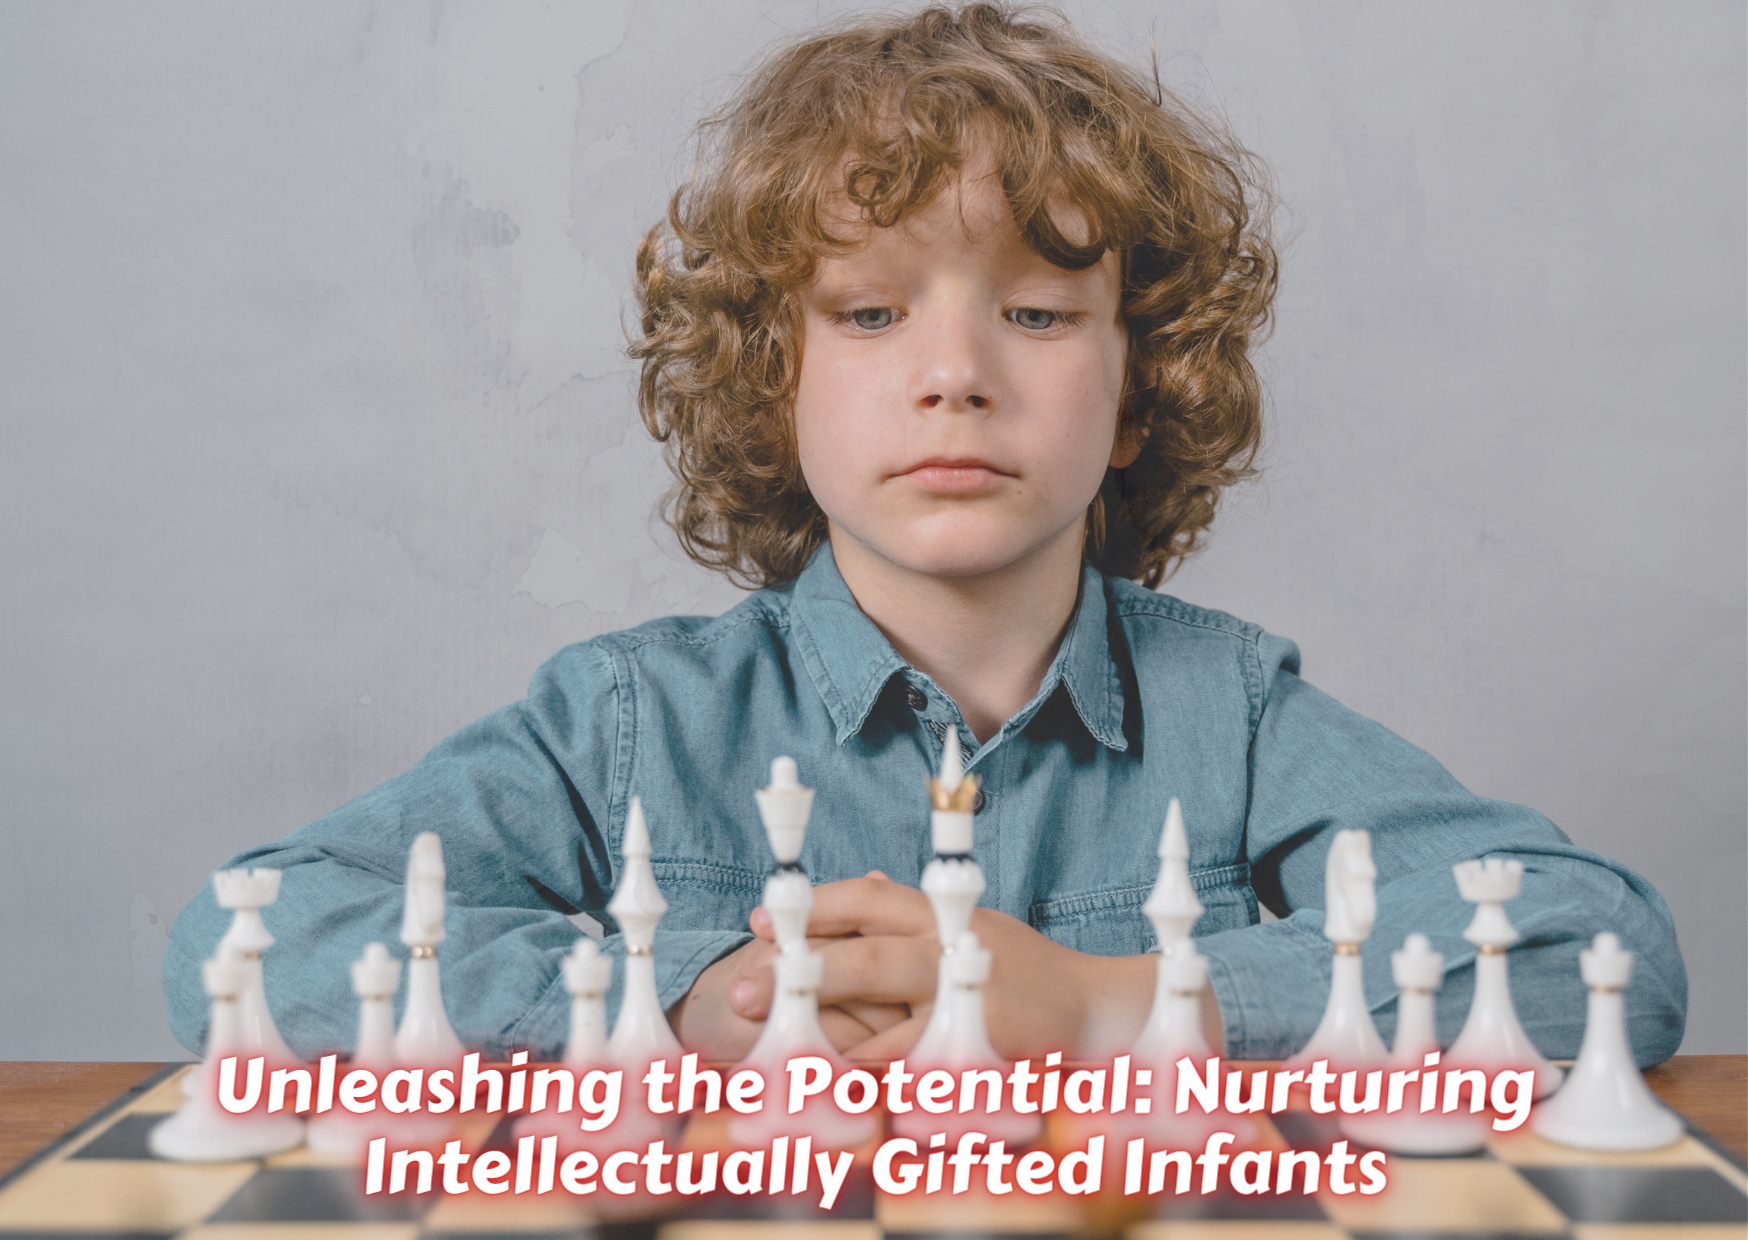 Unleashing the Potential: Nurturing Intellectually Gifted Infants